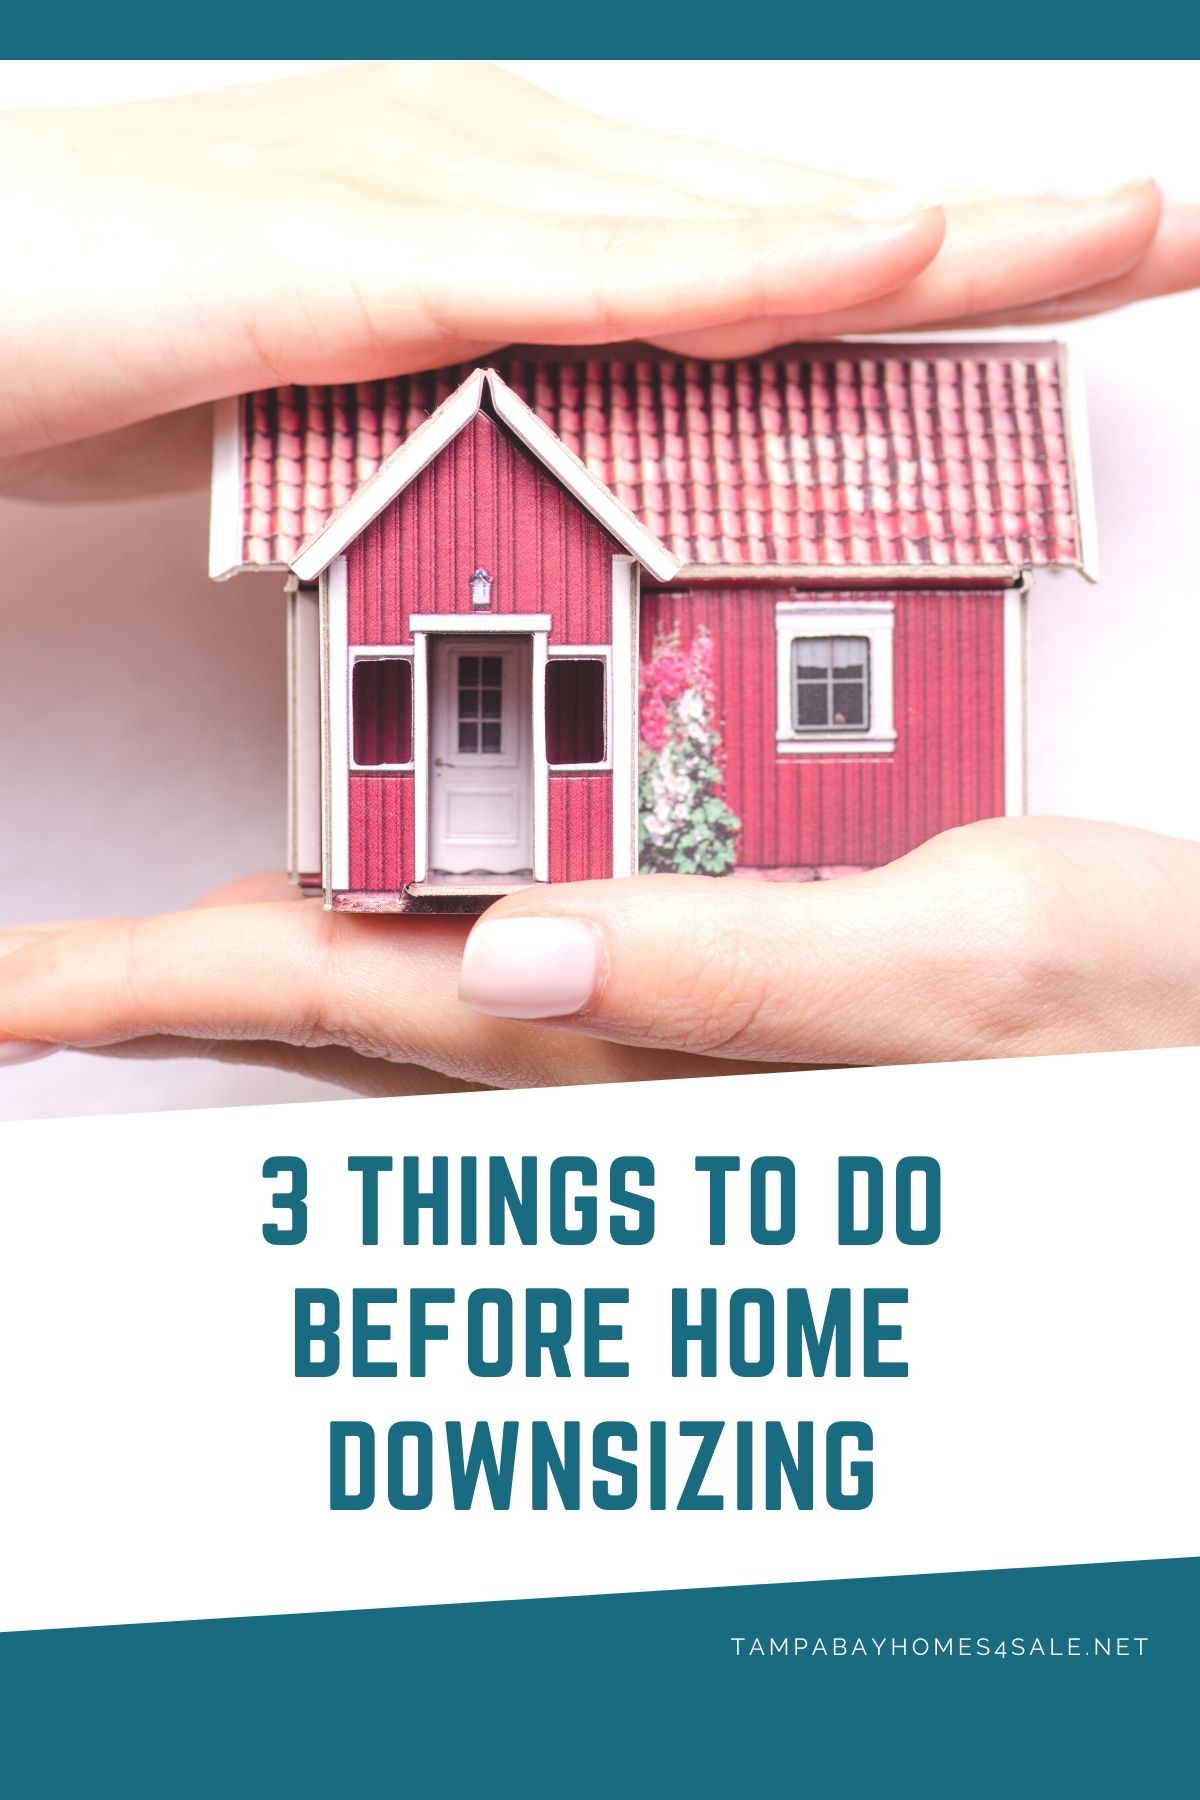 3 Things to Do Before Home Downsizing